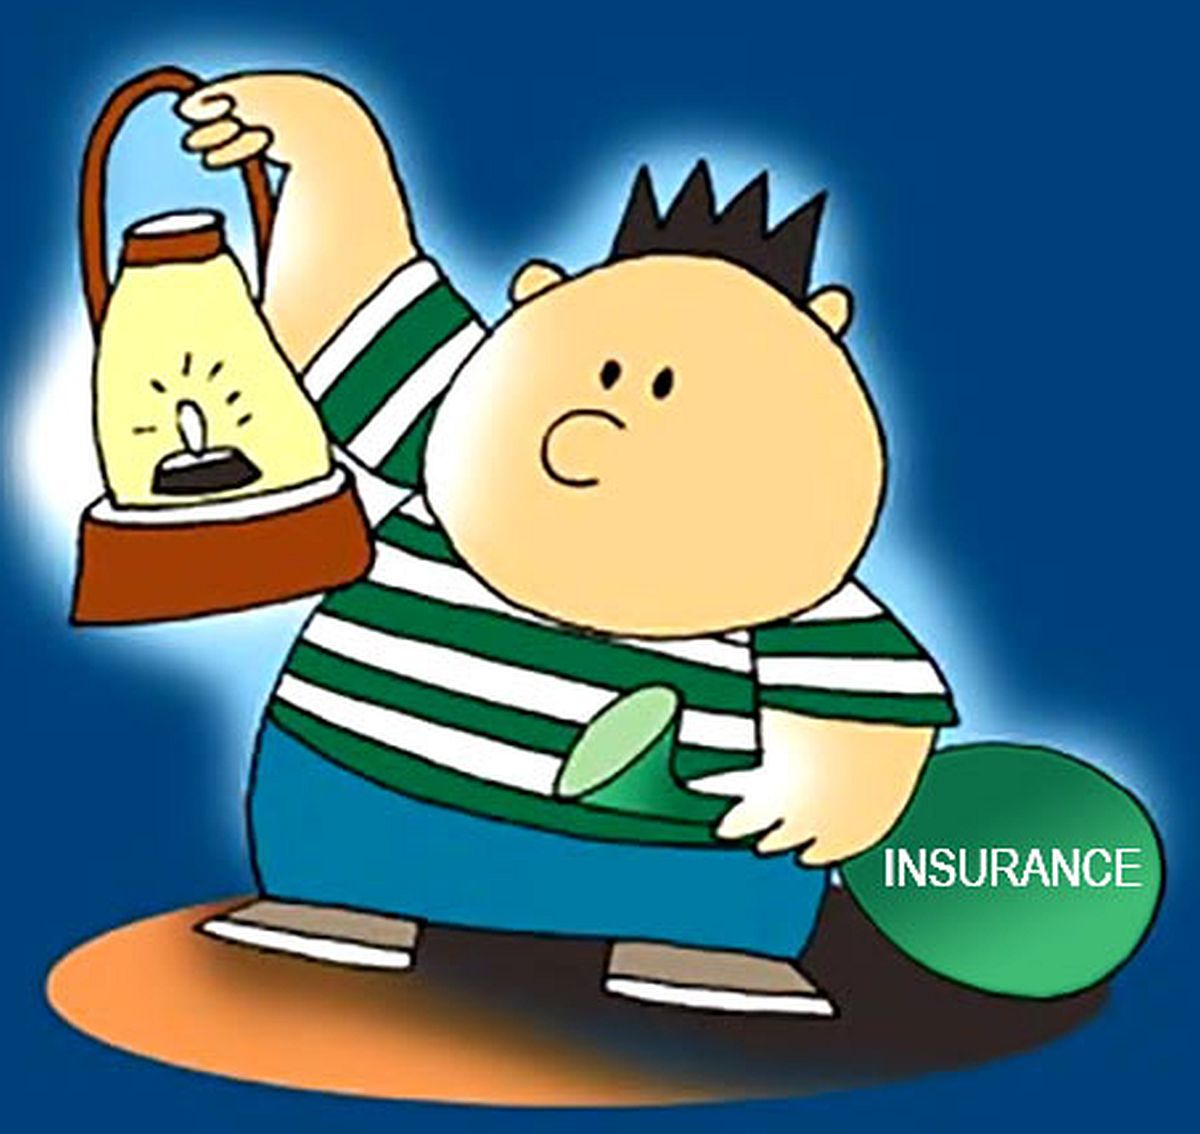 Life Insurers Premium Income Rises 13% to Rs 7.83 Lakh Crore in FY23